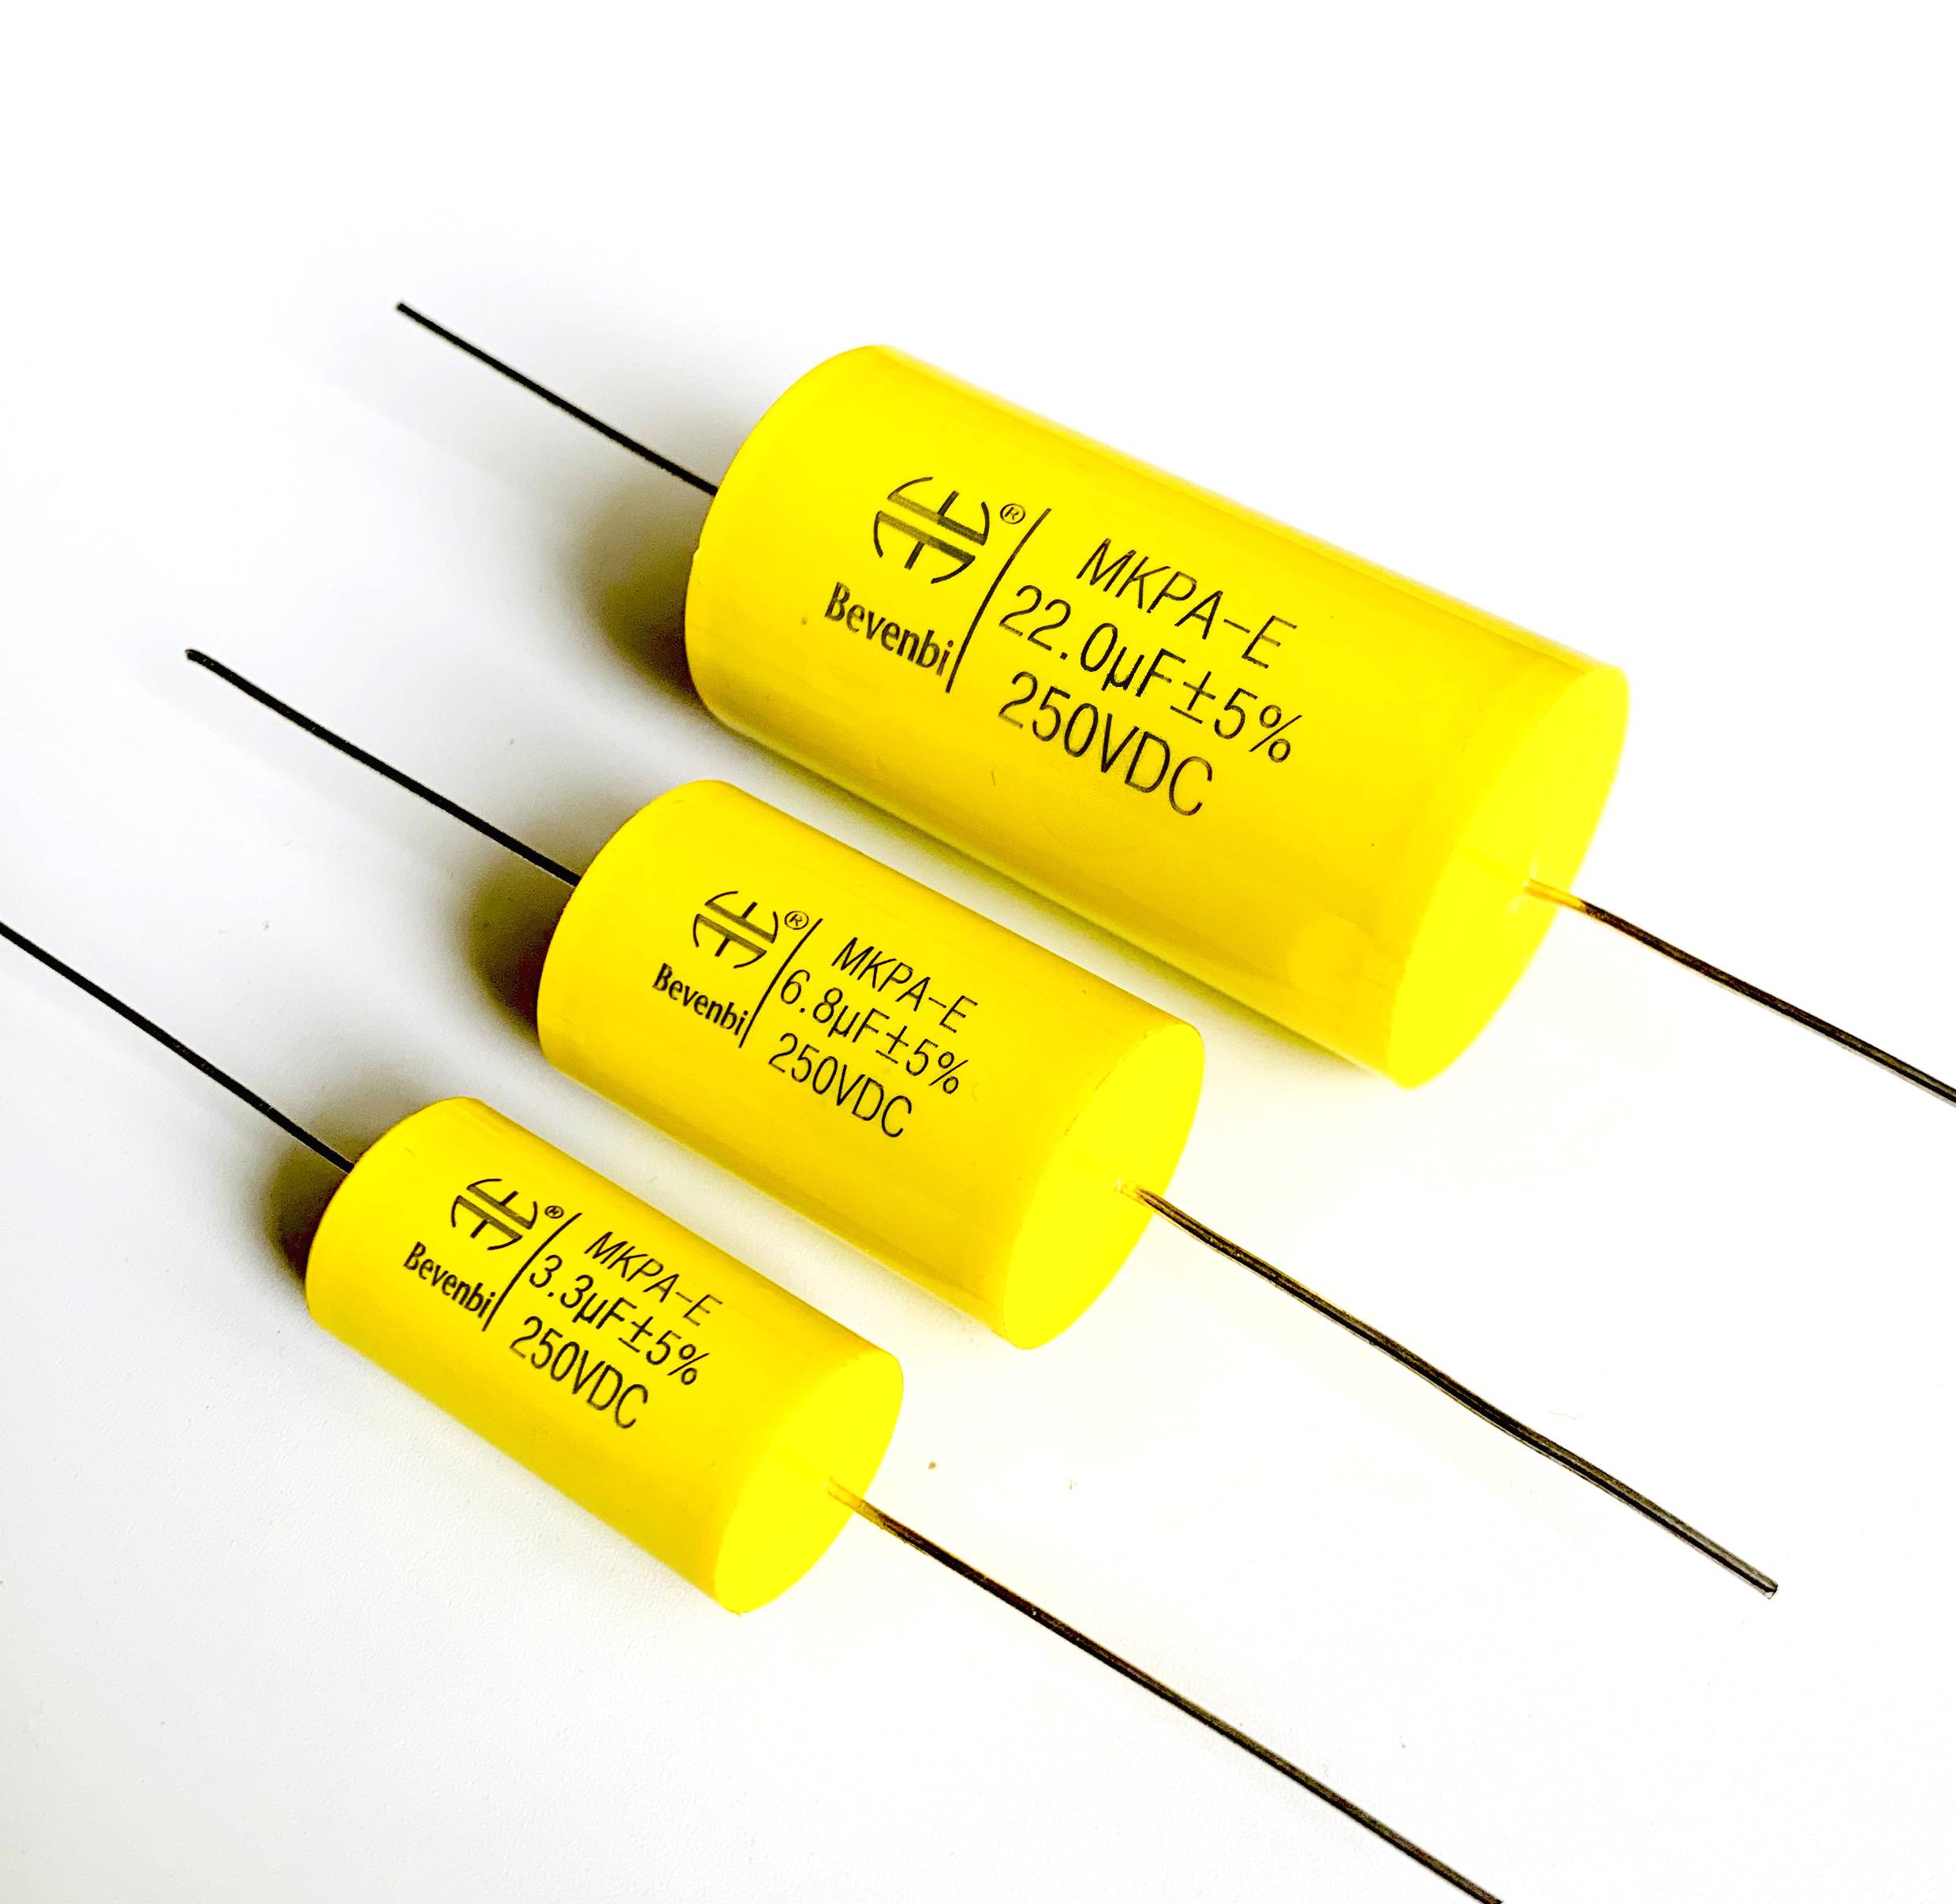 China Audio capacitor metallized polypropylene and polyester film